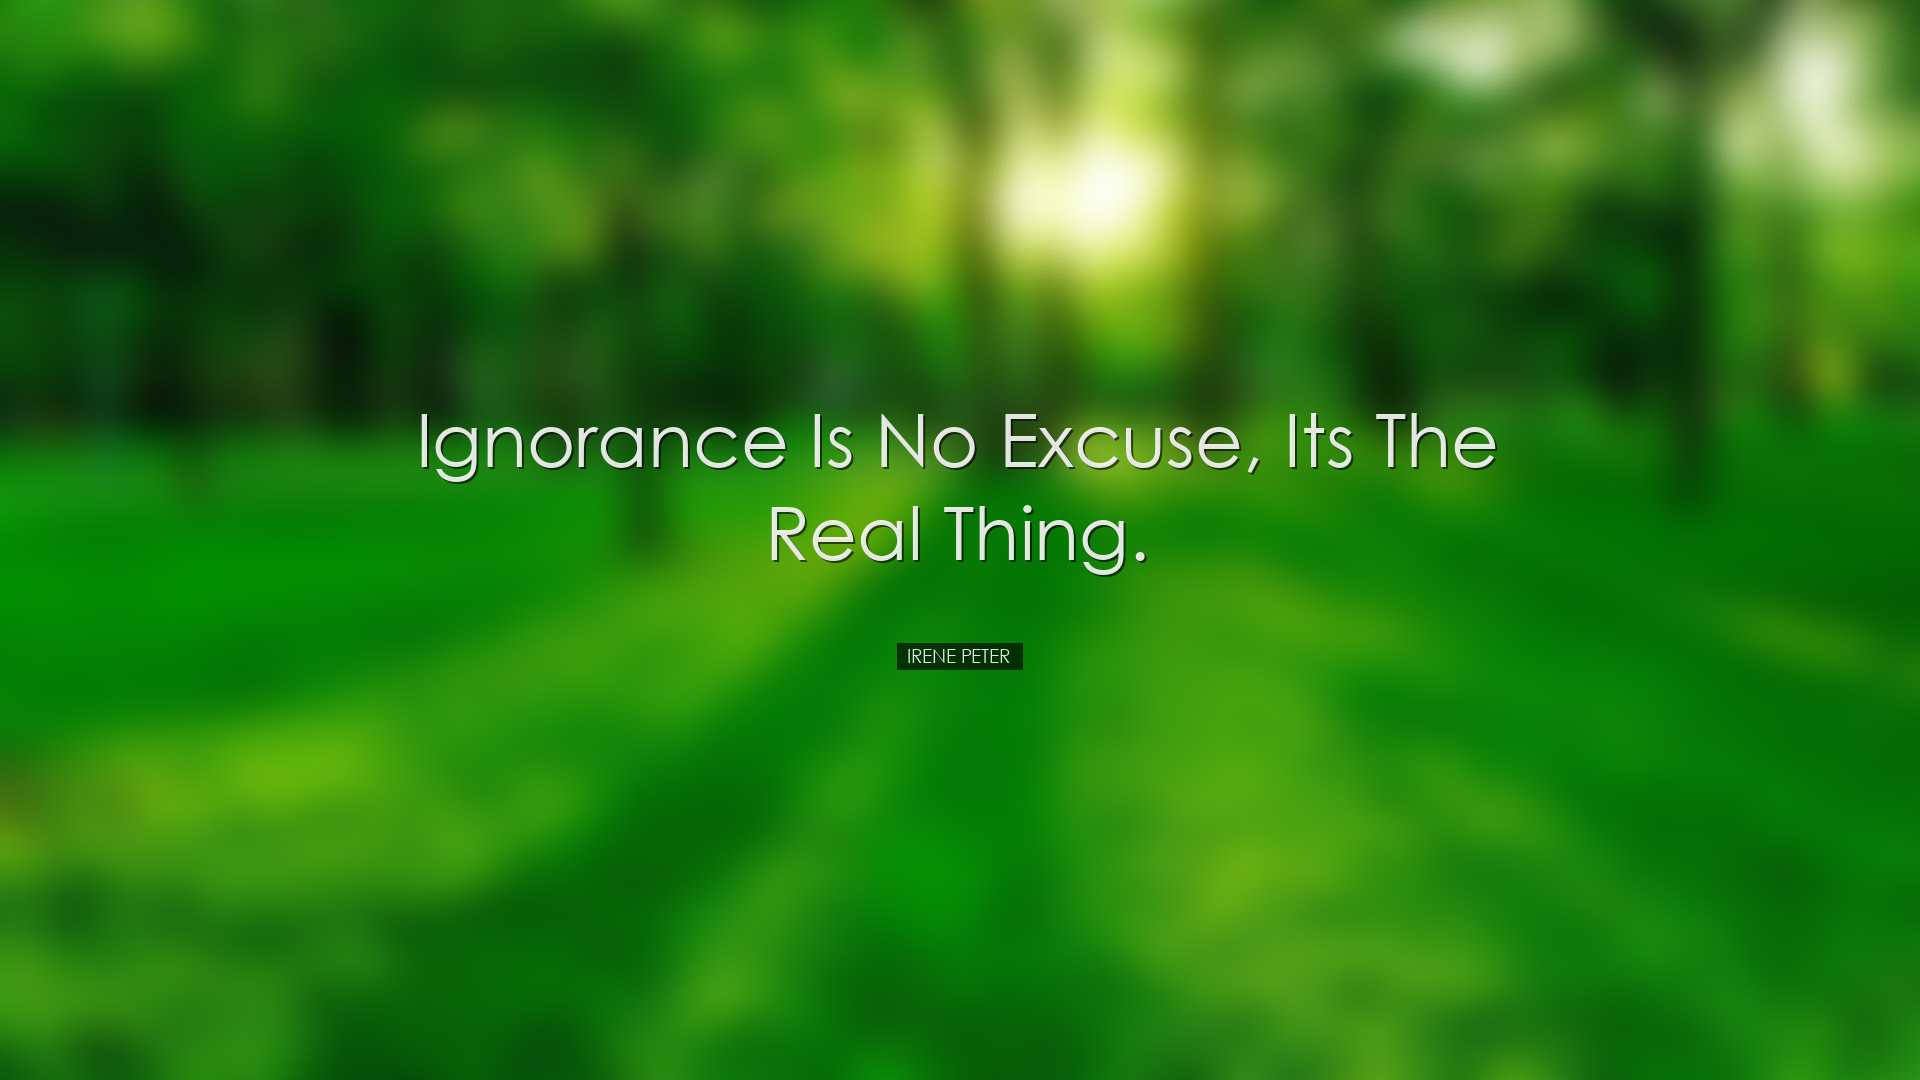 Ignorance is no excuse, its the real thing. - Irene Peter